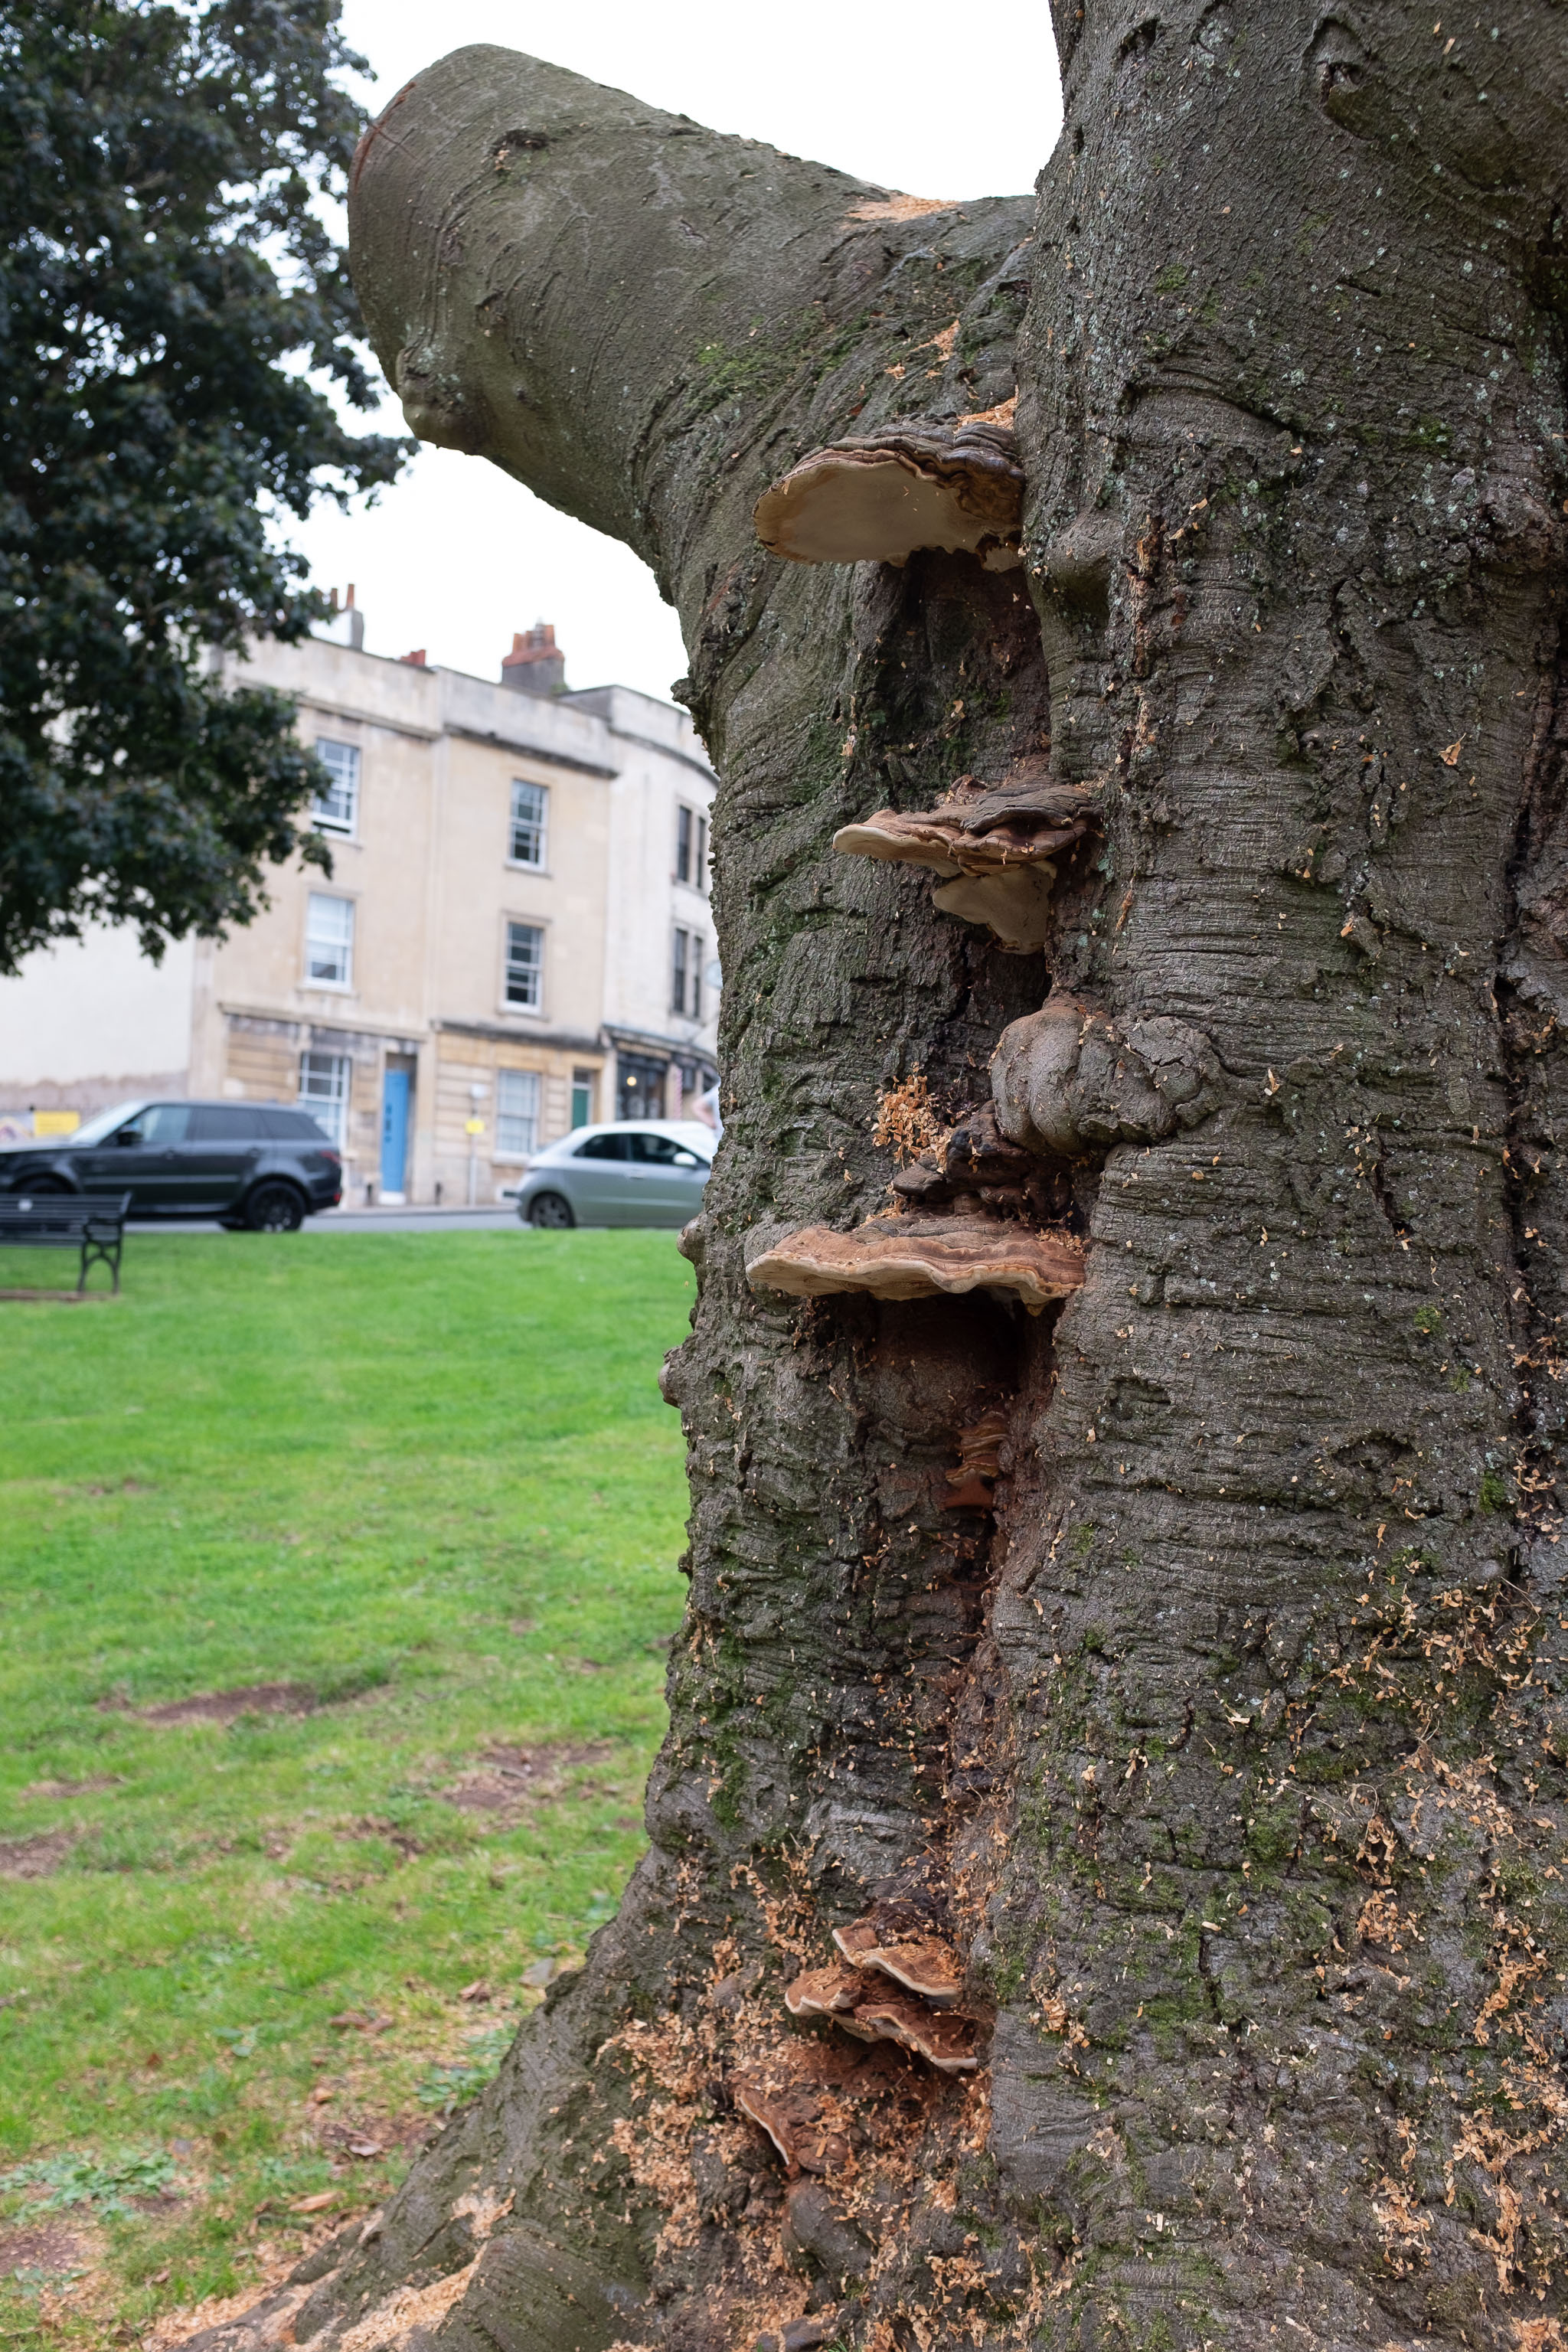 Lopped
I'm no arborist. I have no idea whether the big-arse mushrooms growing from the side here are just plain old benign mushrooms or a symptom of the f...